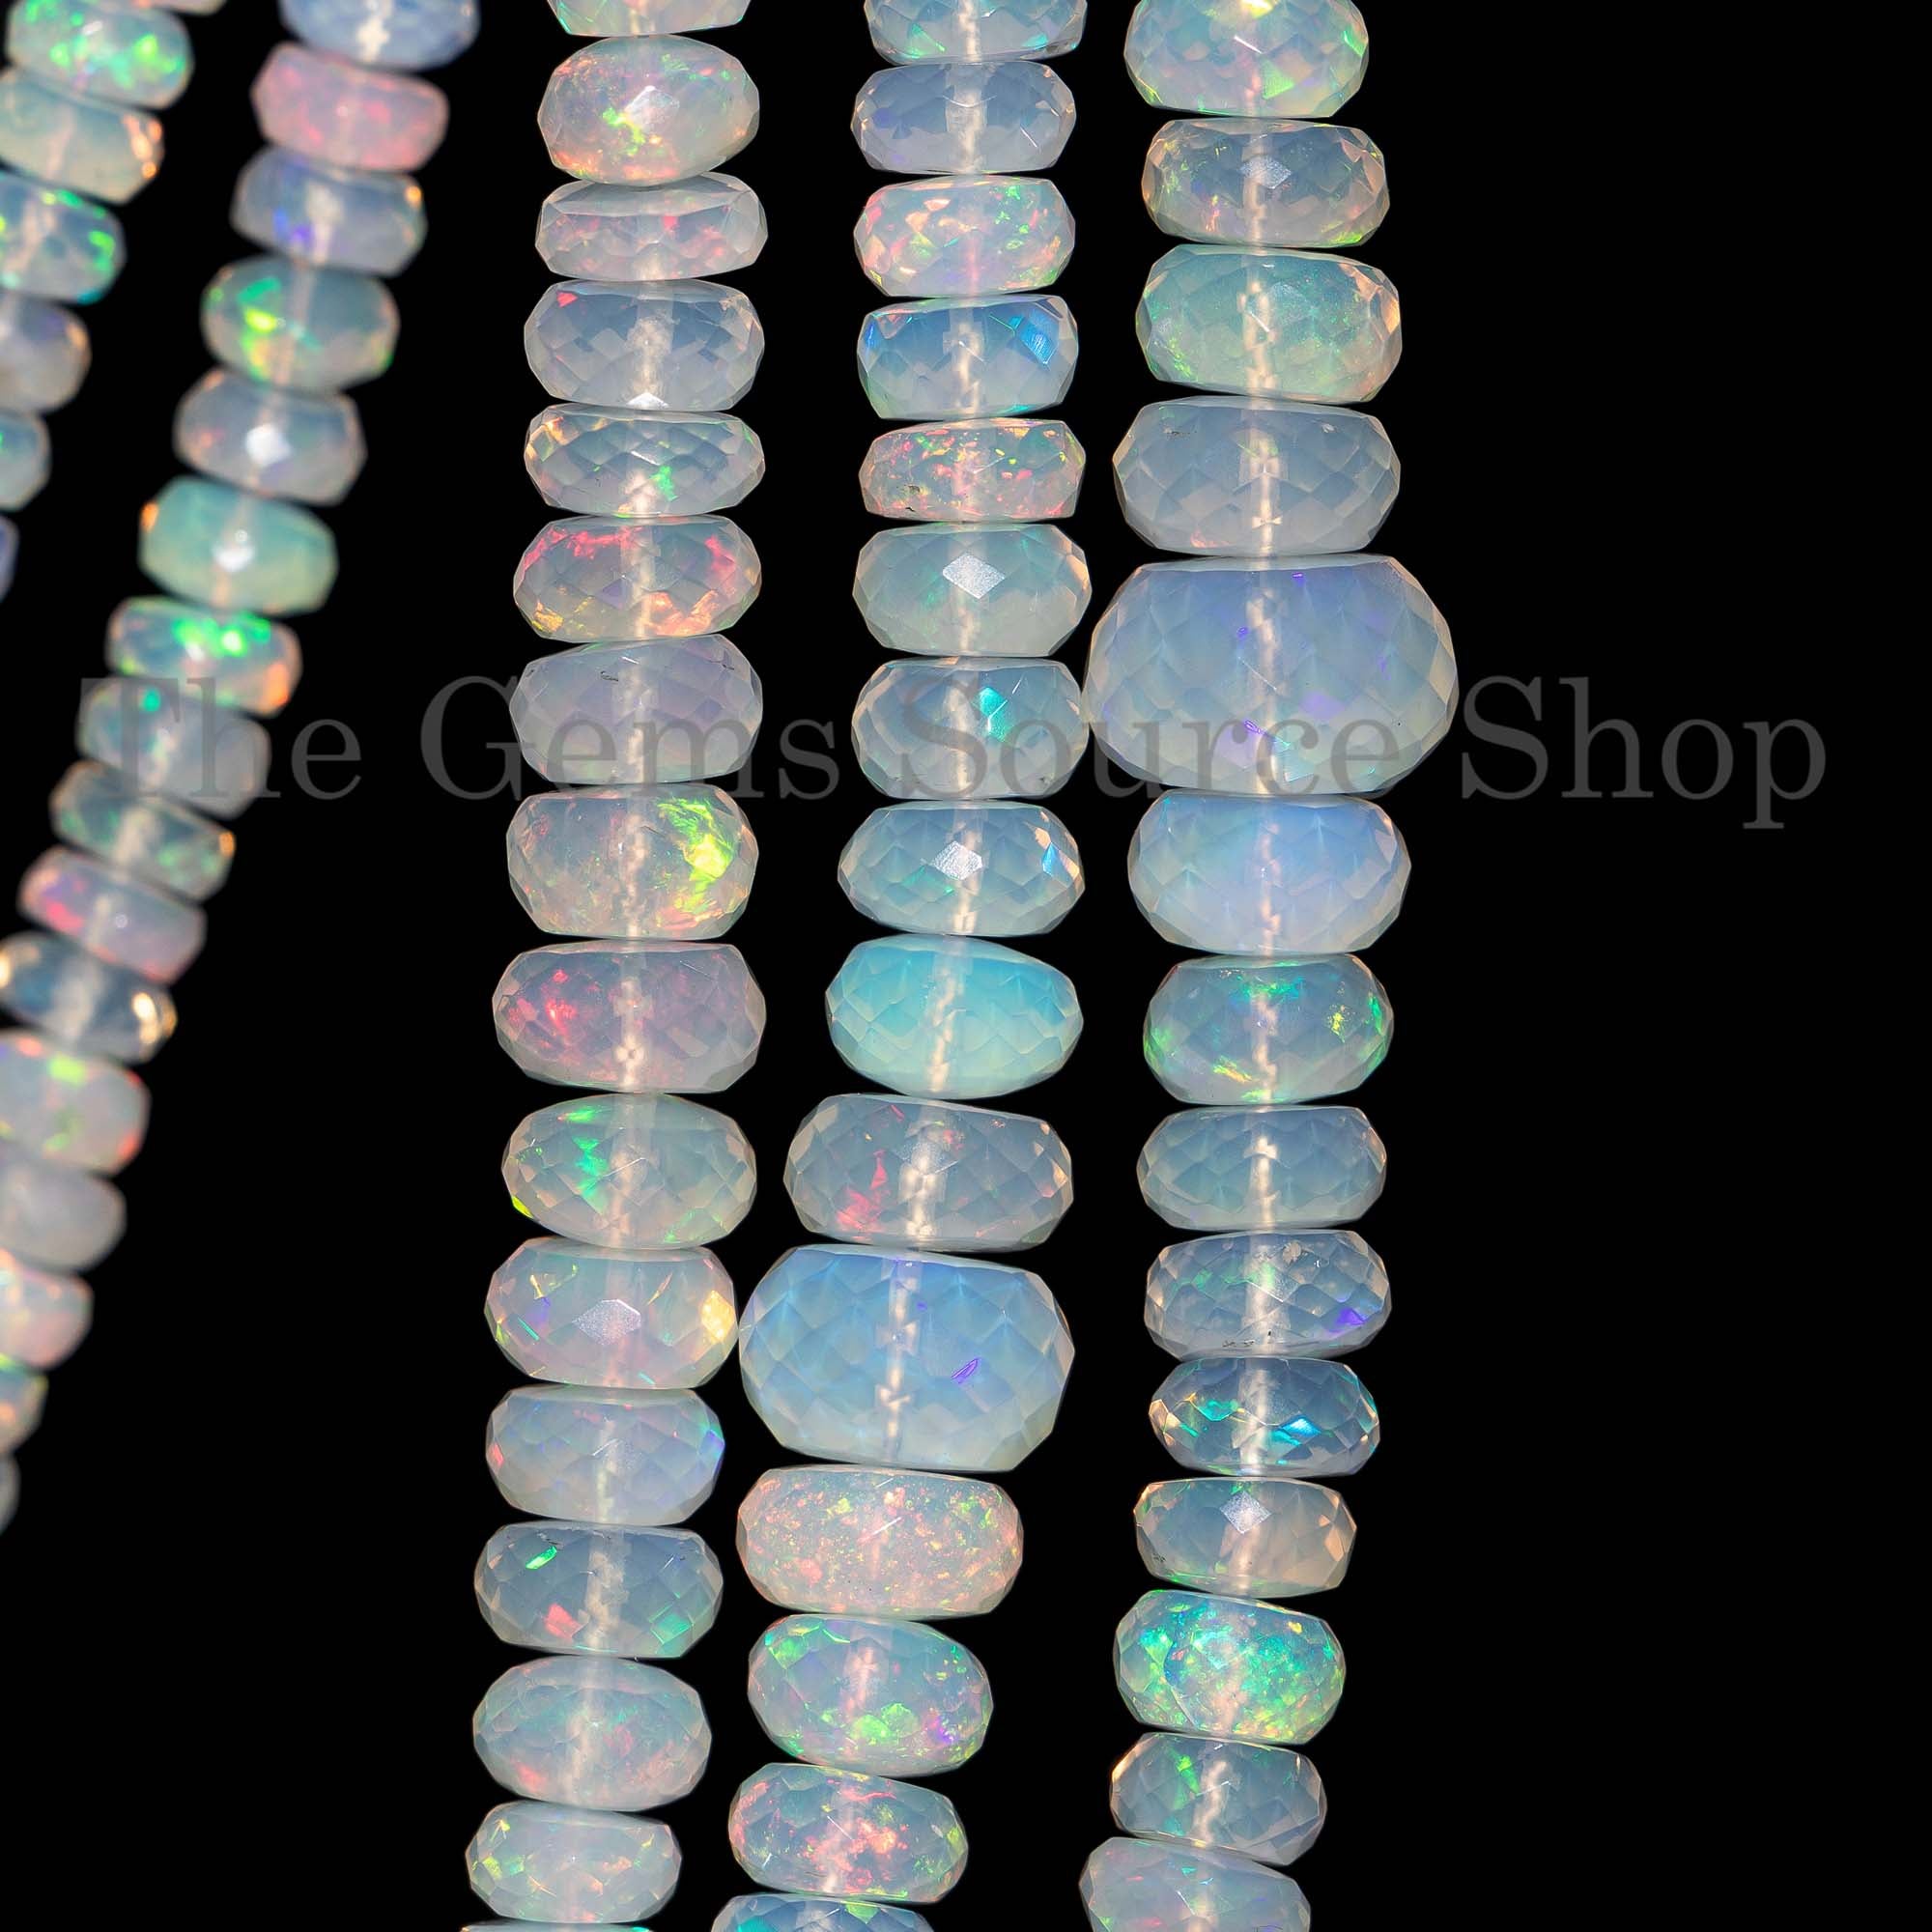 5-8mm Top Quality Ethiopian Opal Beads, Natural Opal Faceted Beads, Fire Opal Rondelle Beads, Opal Gemstone Beads, Big Size Opal Beads